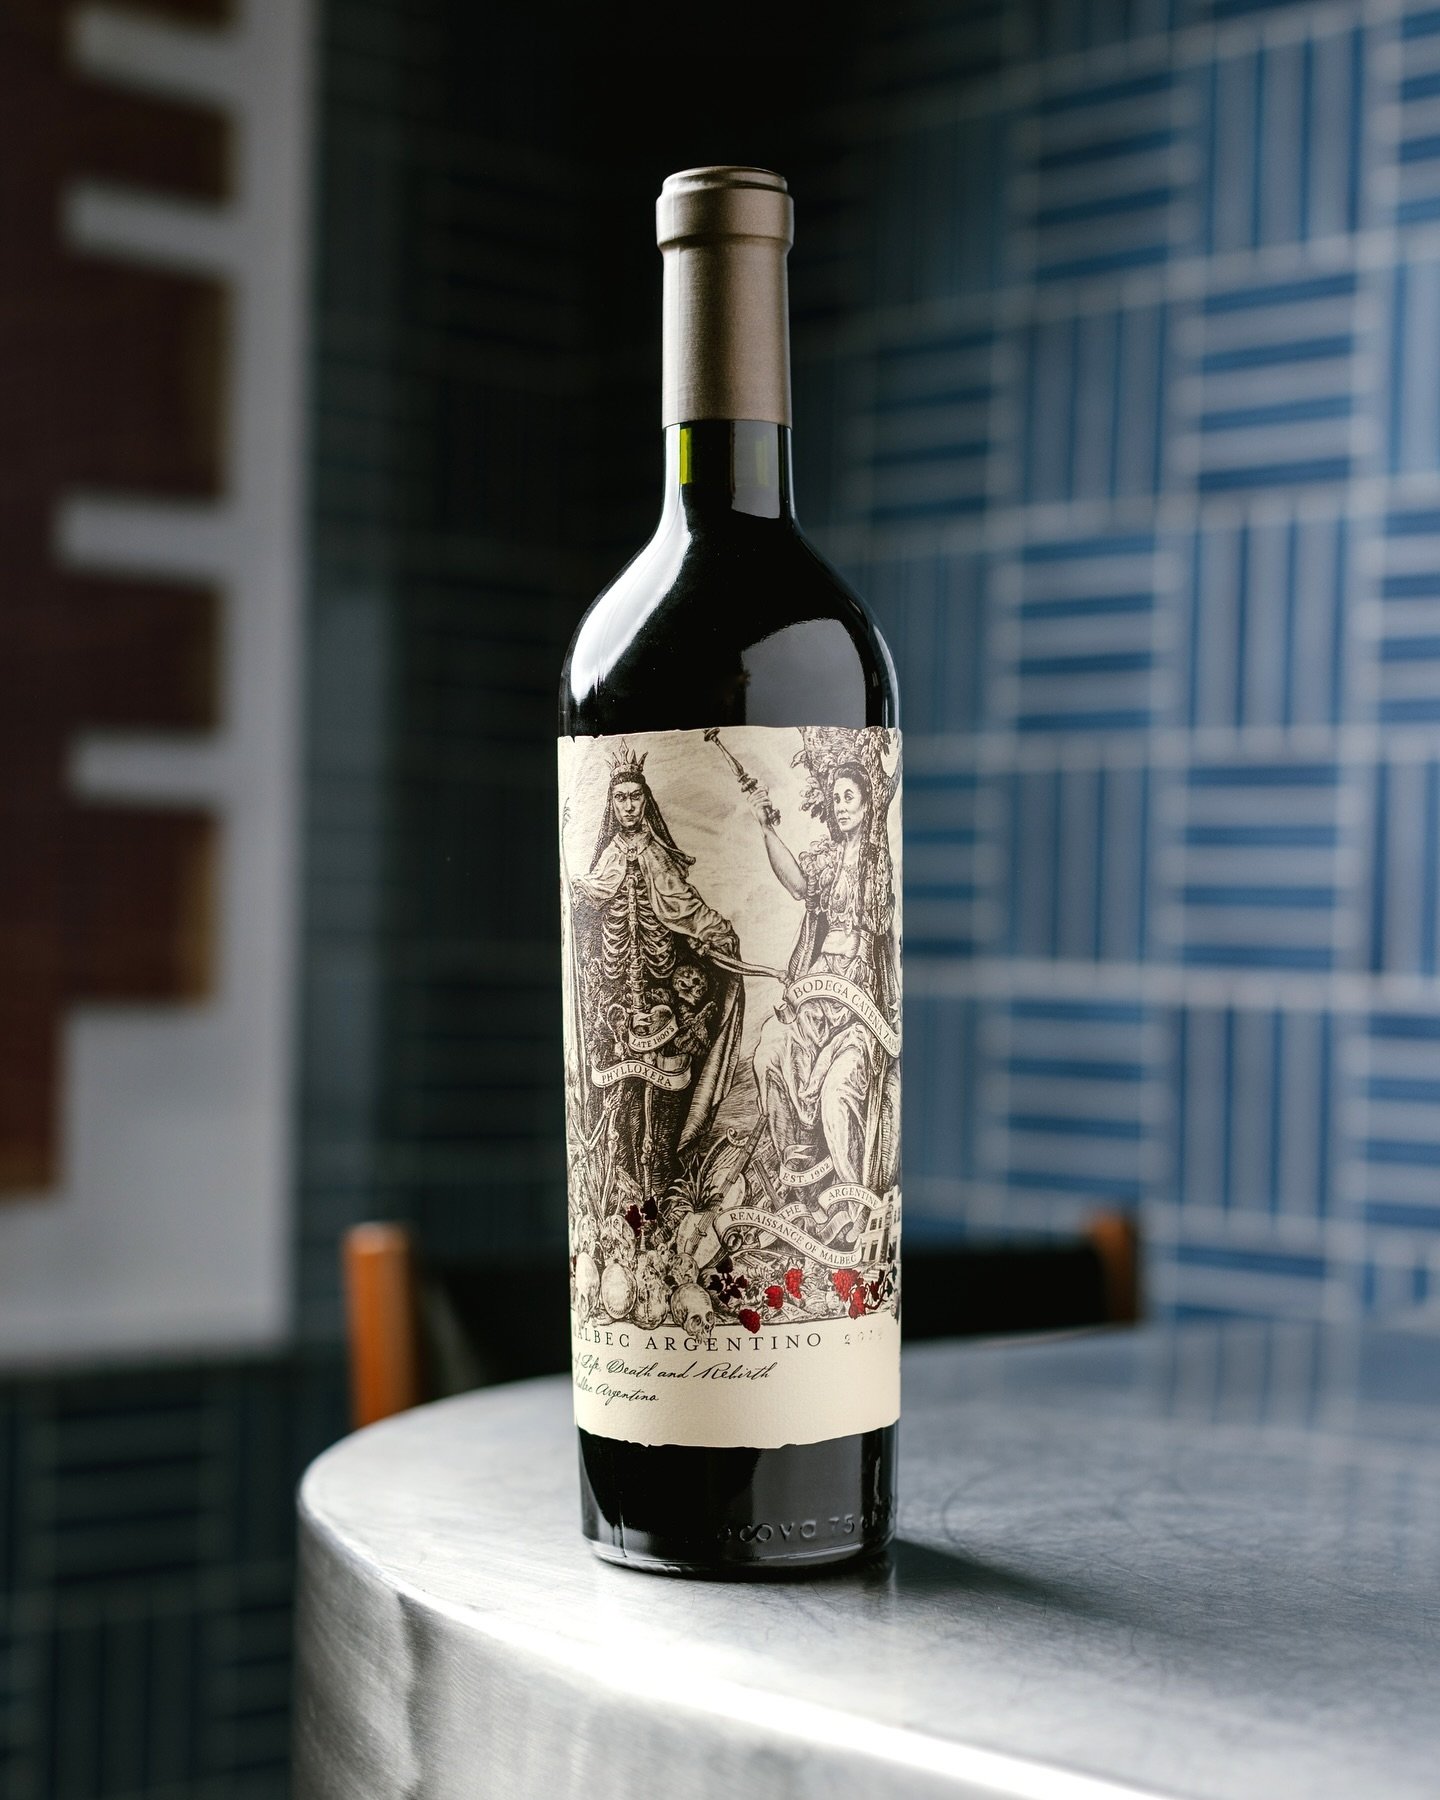 Rejoice in the spirits of Malbec and sip away the beautiful story of Malbec &mdash; deep flavours of blackberry, plum, and dark chocolate, balanced by velvety tannins on the palate. From the sun-drenched vineyards of Mendoza, Argentina, to its French